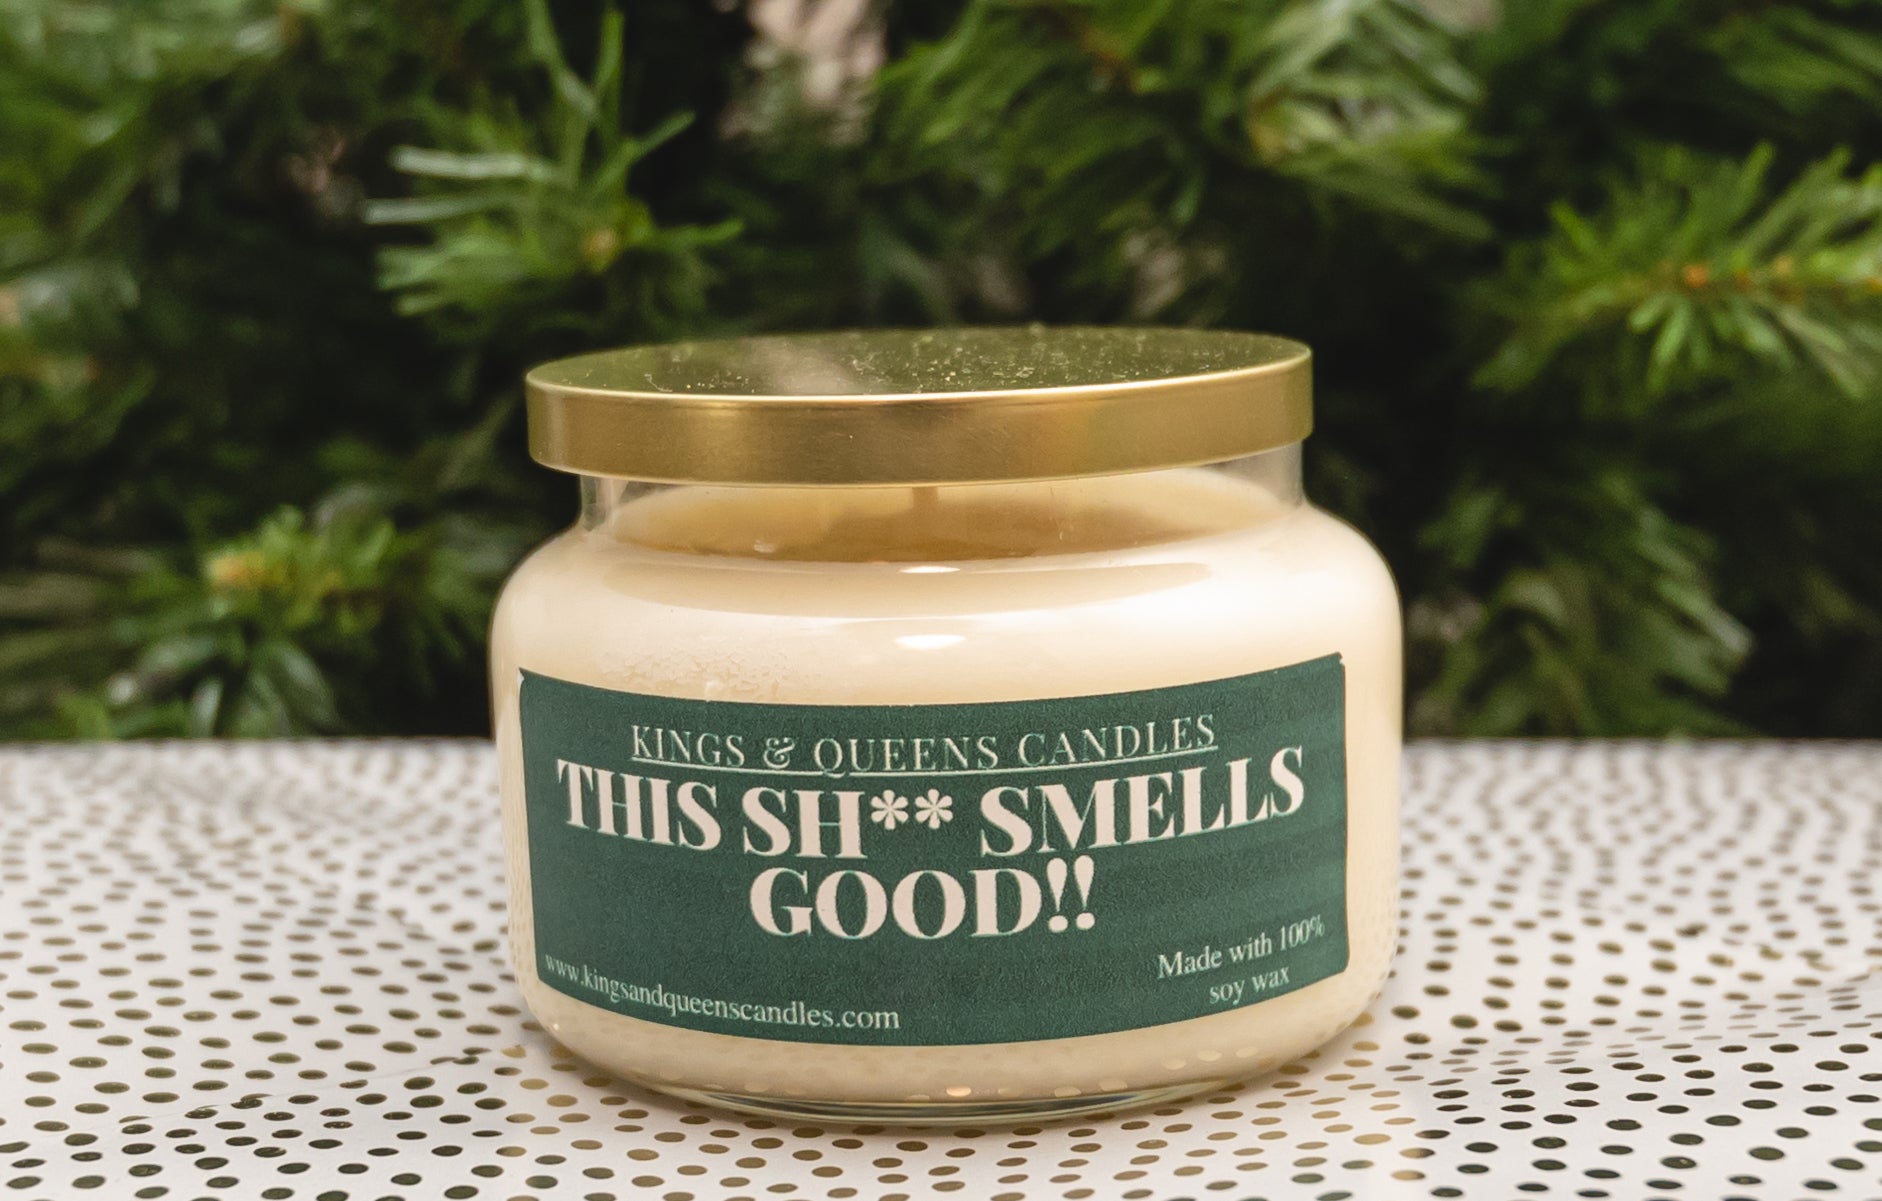 This Sh** Smells Good - Kings and Queens Candles